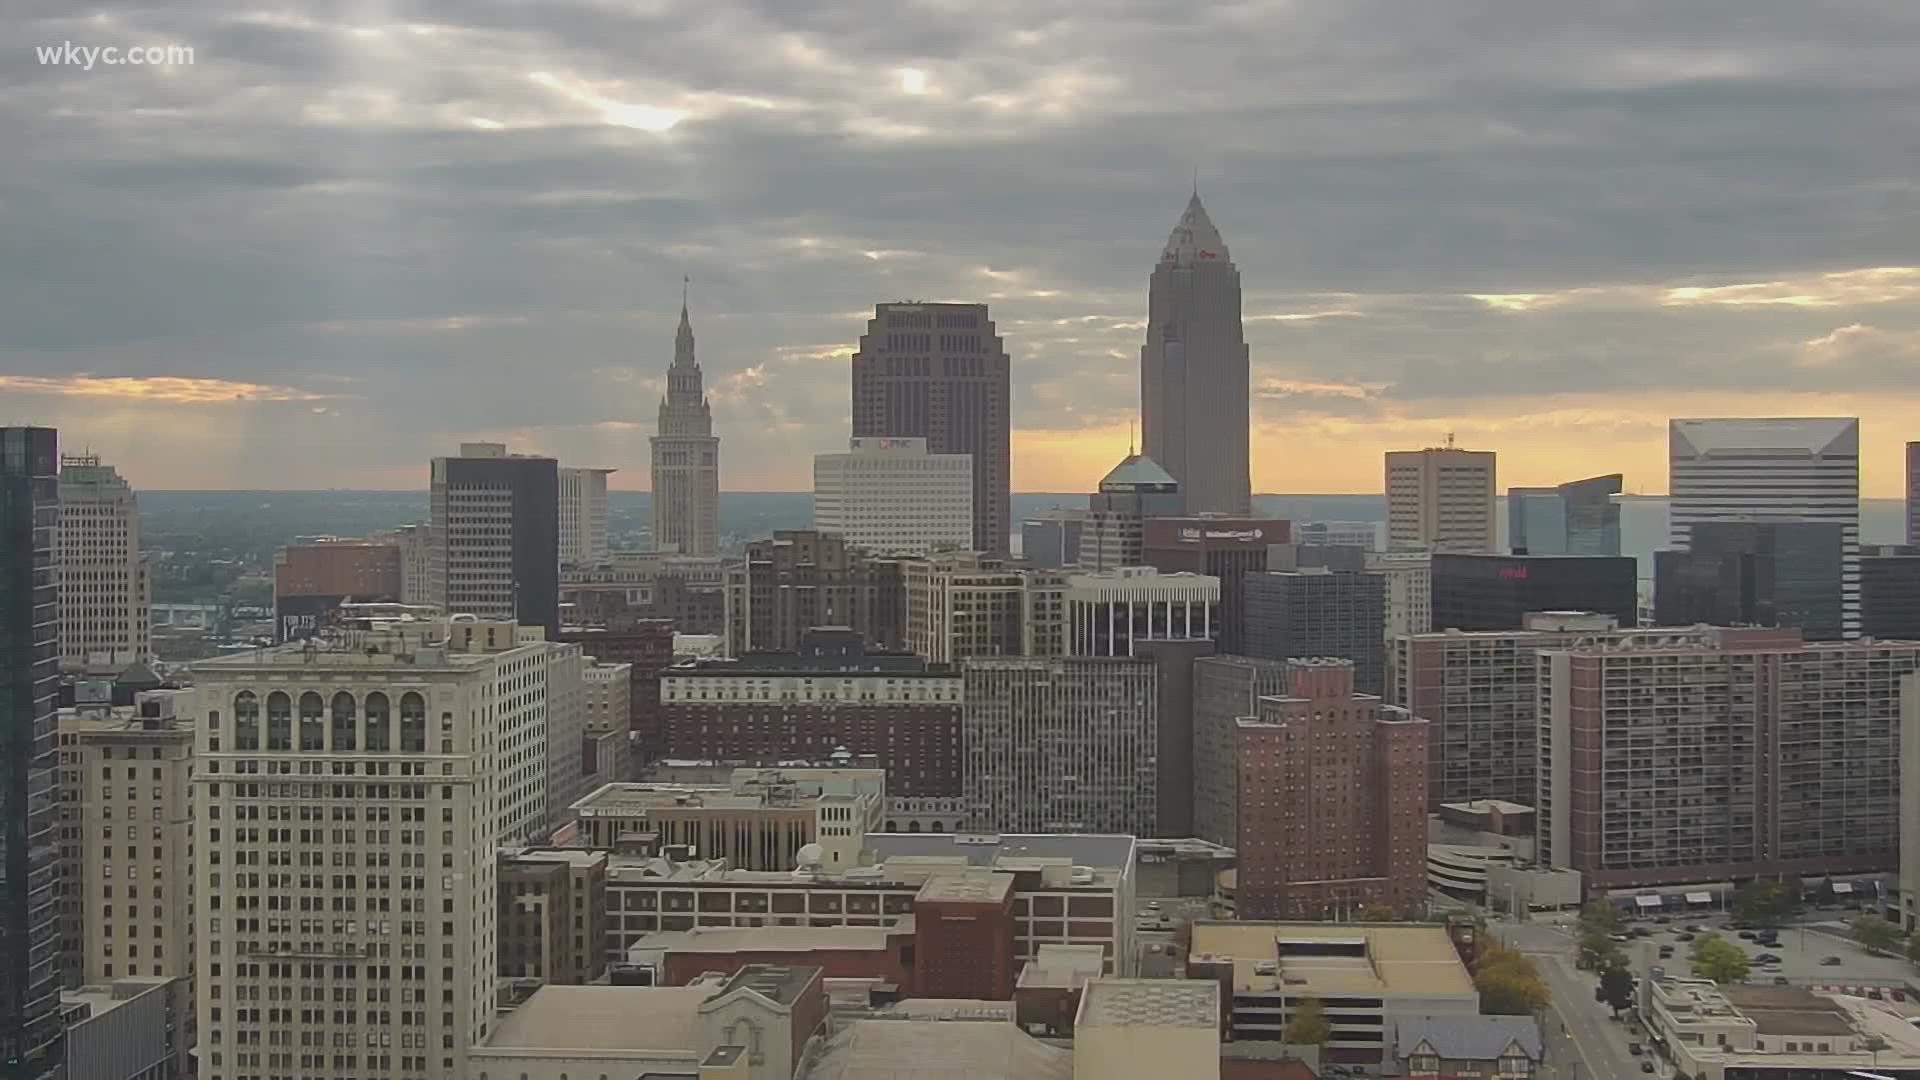 The weather in Cleveland will soon feel like Fall later this week.